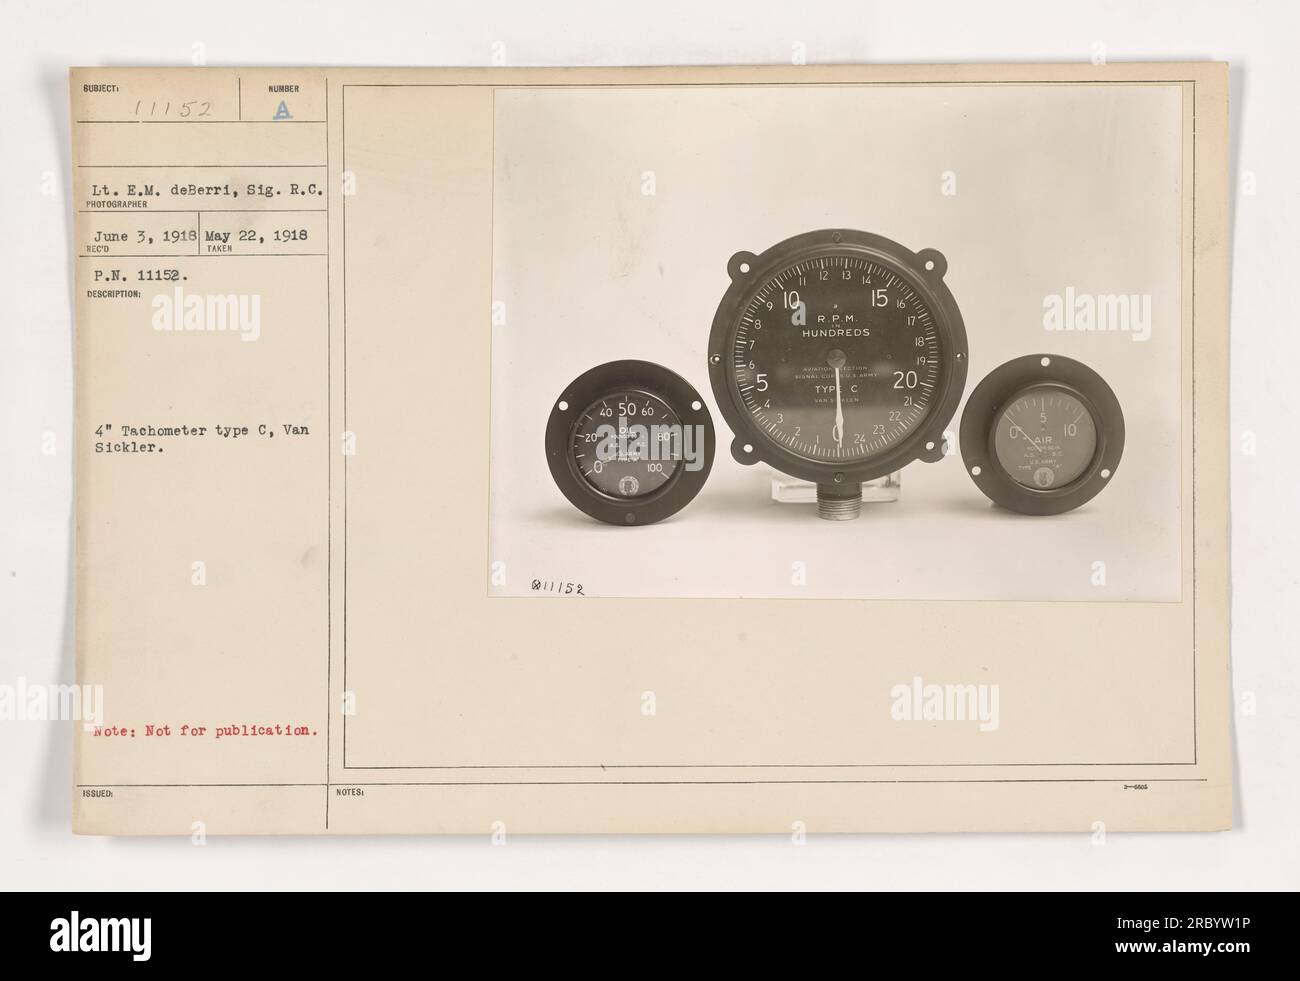 Soldiers using Tachometer type C by Van Sickler on May 22, 1918. Lt. E.M. deBerri from the Signal Corps took this photo on June 3, 1918. The photo has a number of 11152 and is marked 'Not for publication.' The tachometer's RPM ranges from 20 to 60. Stock Photo